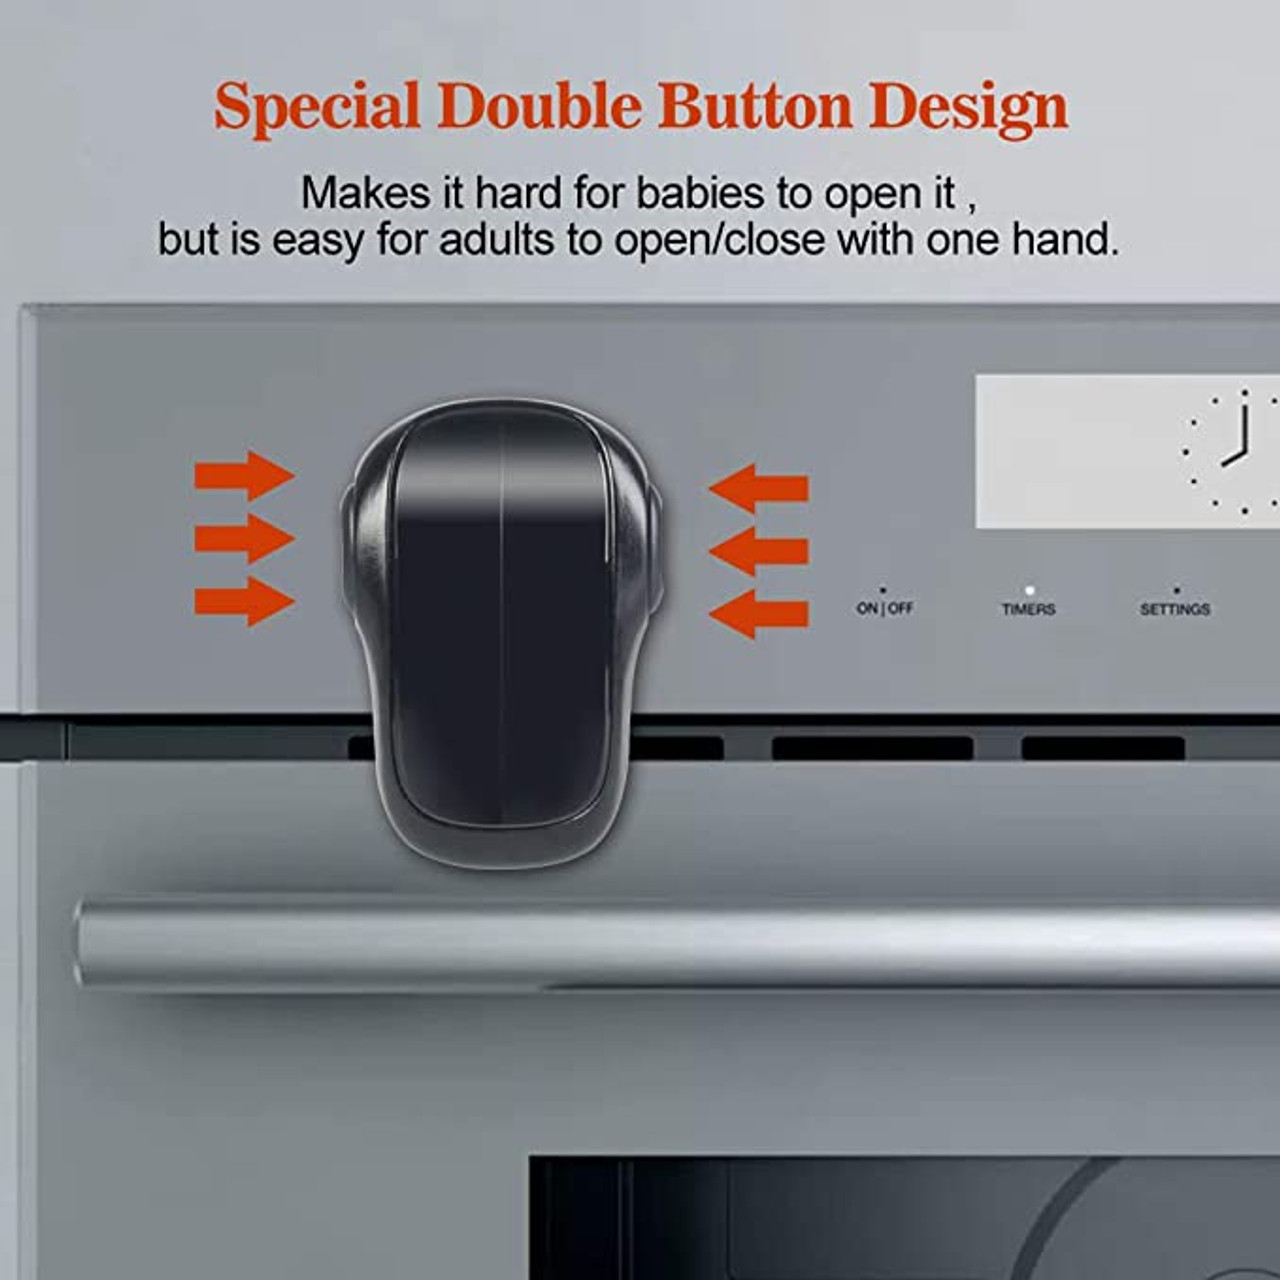 EUDEMON Child Safety Heat-Resistant Oven Door Lock, Oven Front Lock for Kids Easy to Install, Use 3M Adhesive,No Screws or Drill (Clear-Black)